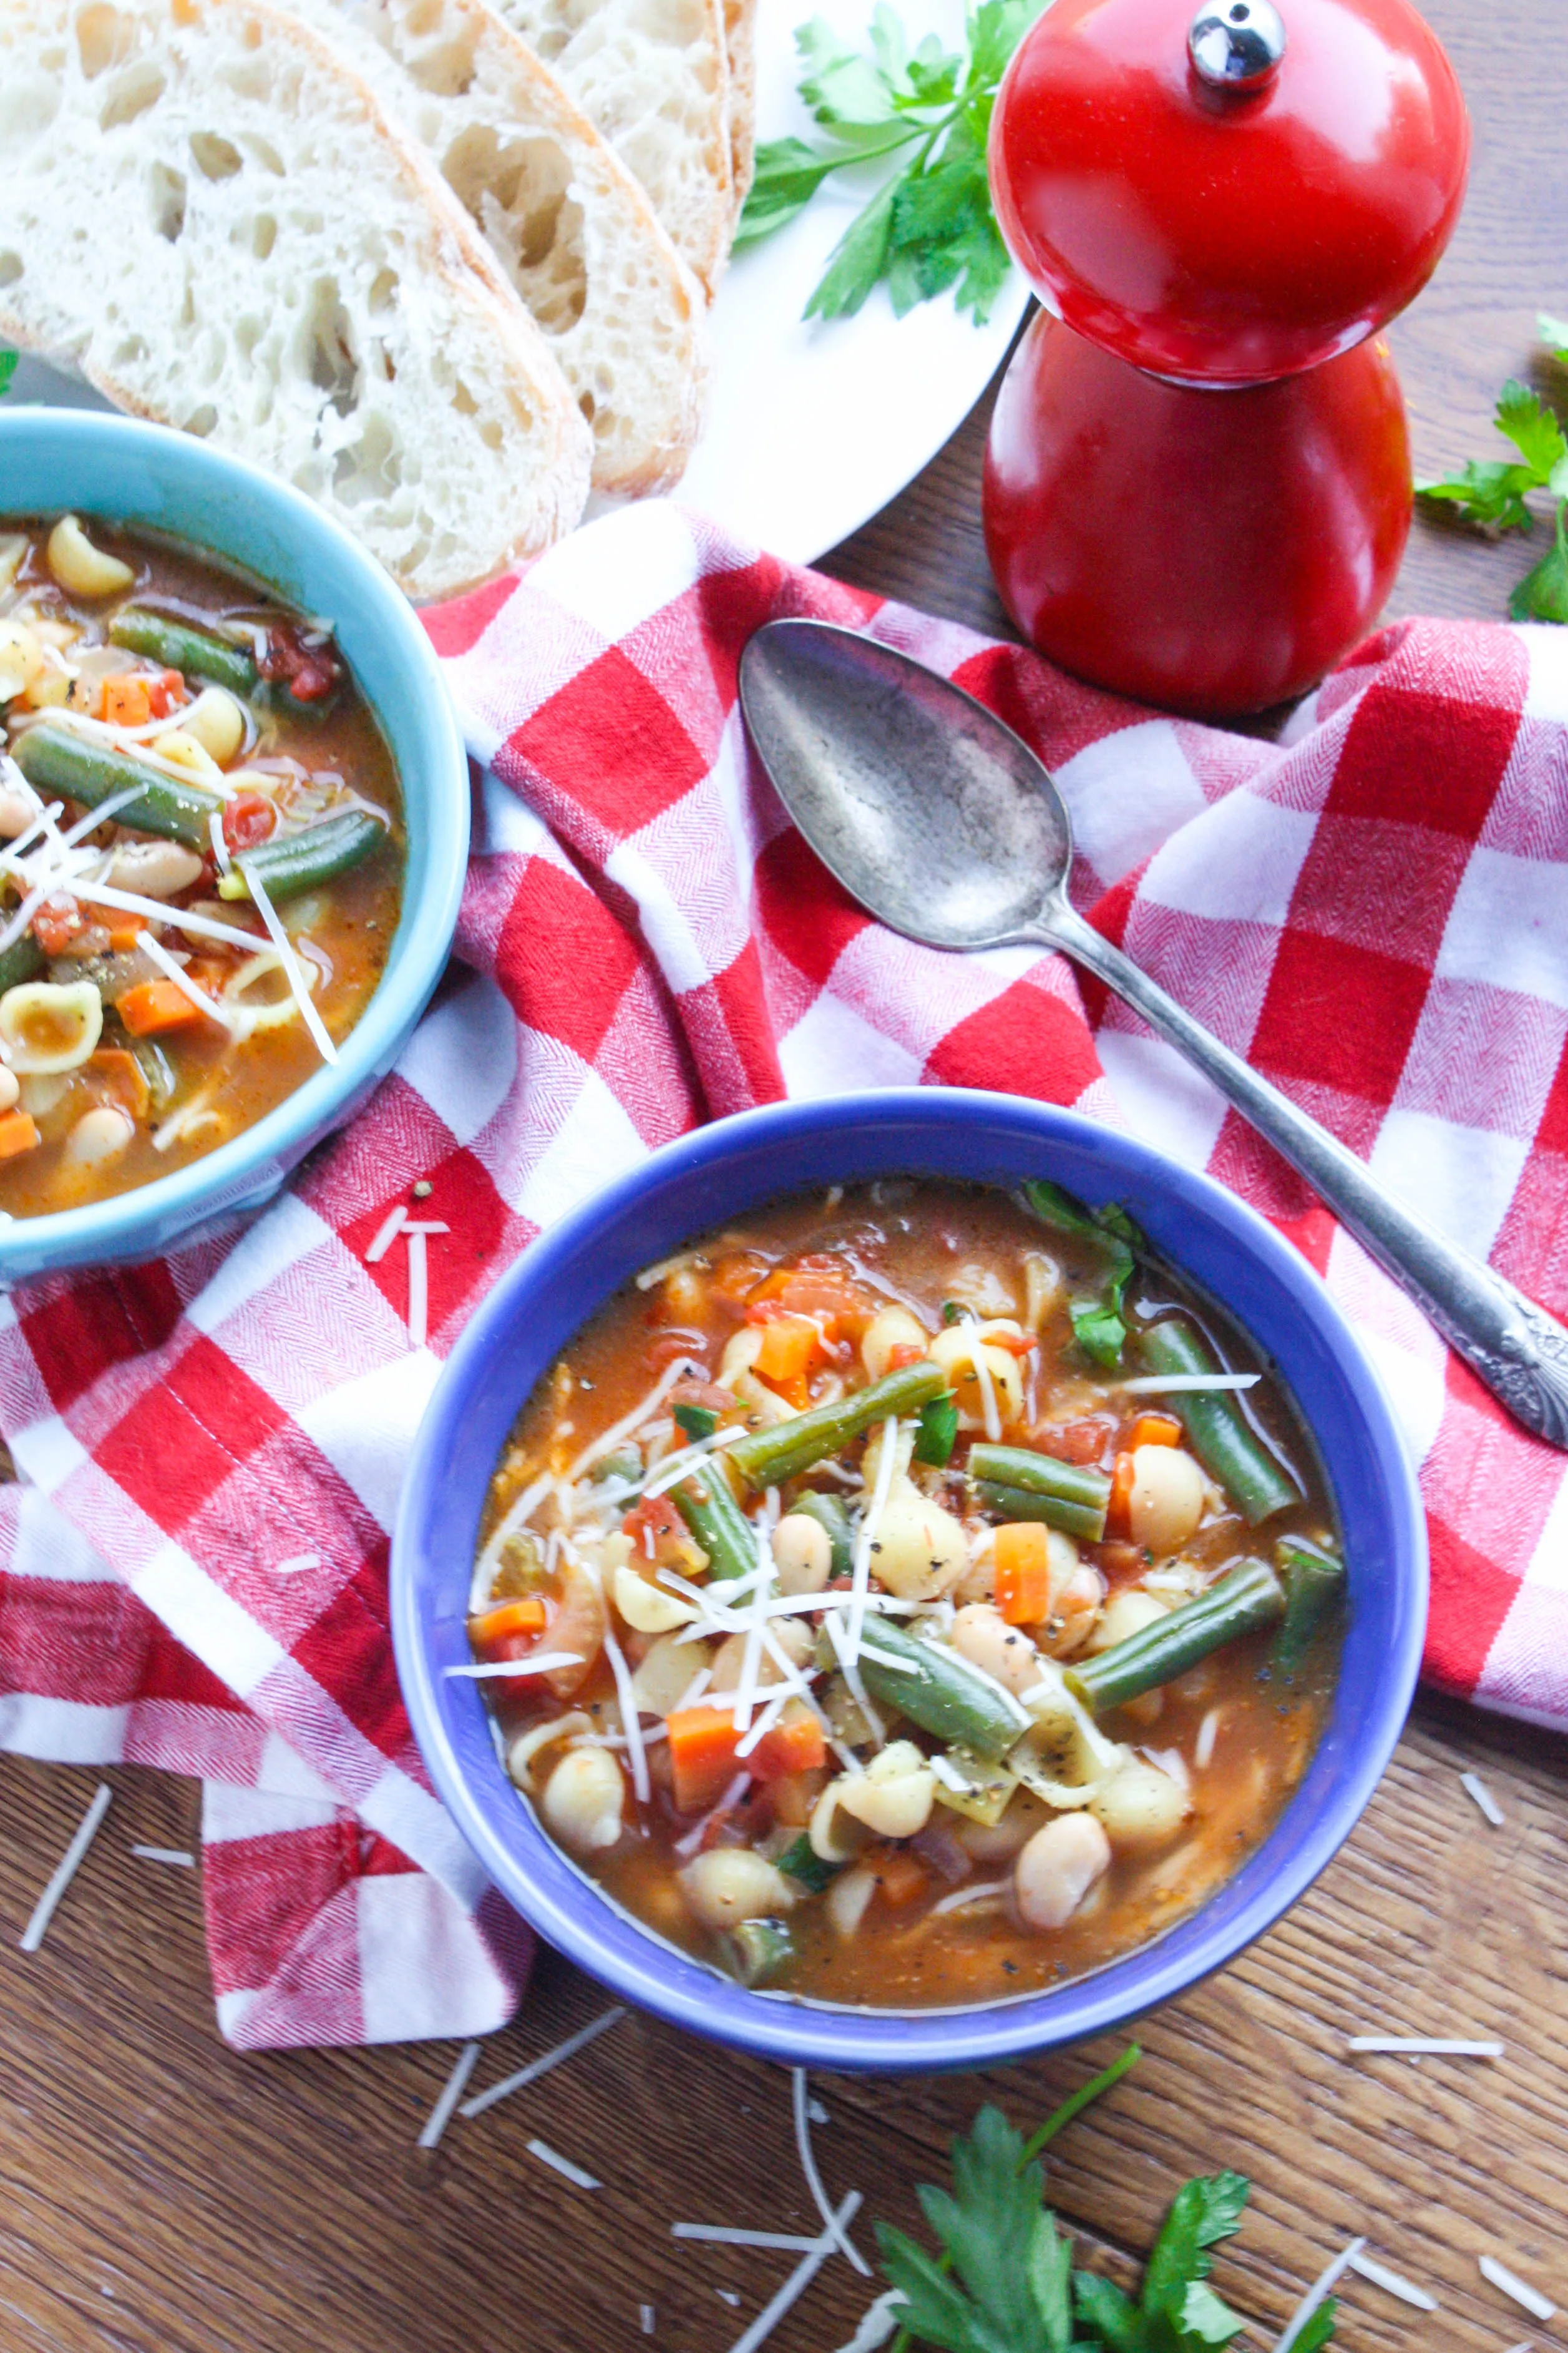 Minestrone Soup is filled with veggies, beans, and pasta. You'll love minestrone soup as a tasty meatless dish.